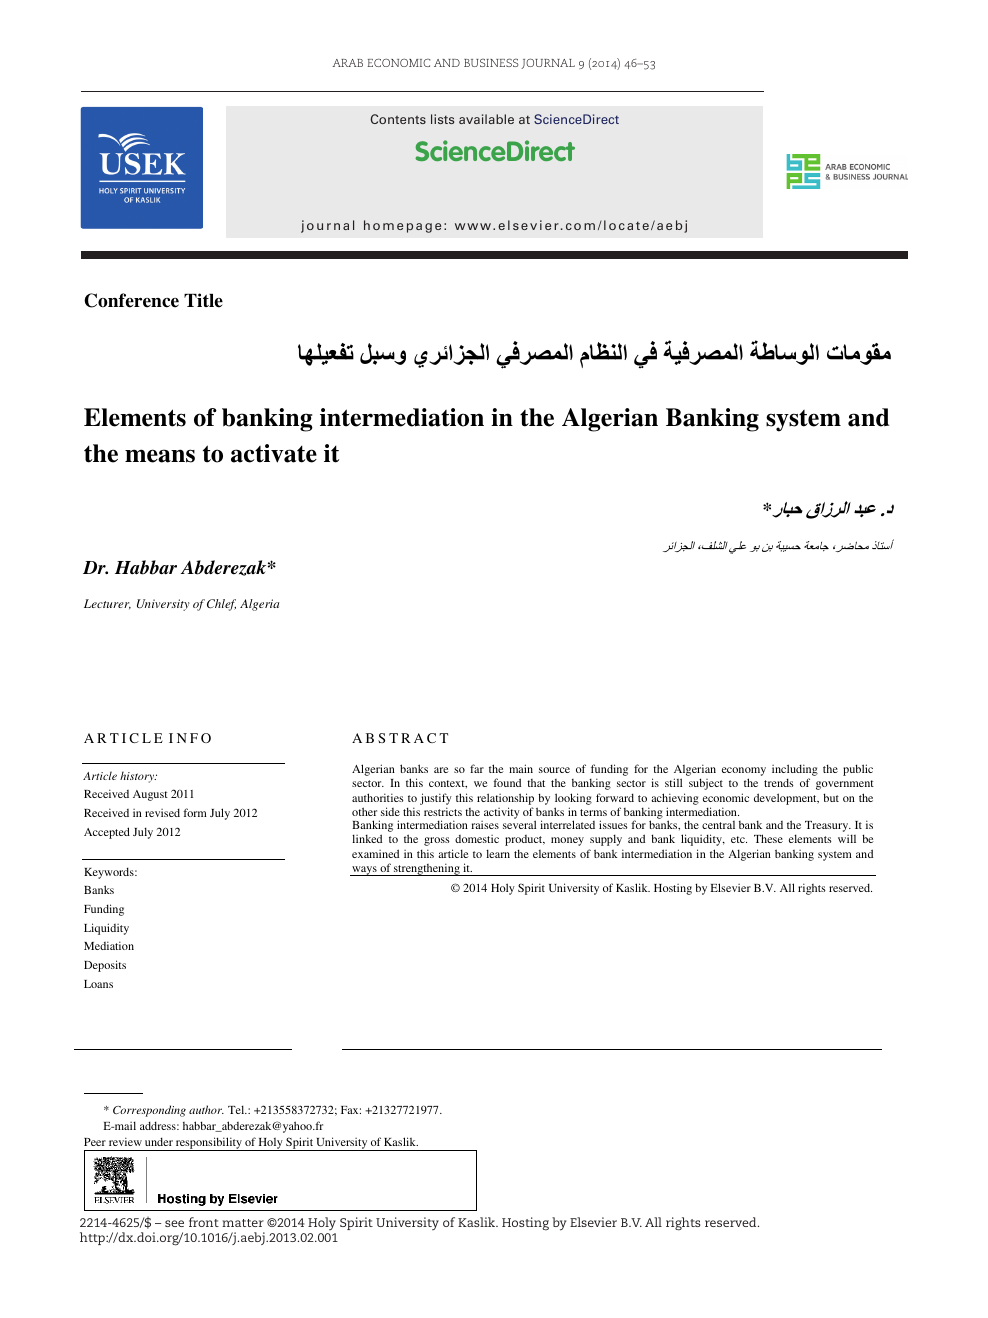 Elements Of Banking Intermediation In The Algerian Banking System And The Means To Activate It Topic Of Research Paper In Law Download Scholarly Article Pdf And Read For Free On Cyberleninka